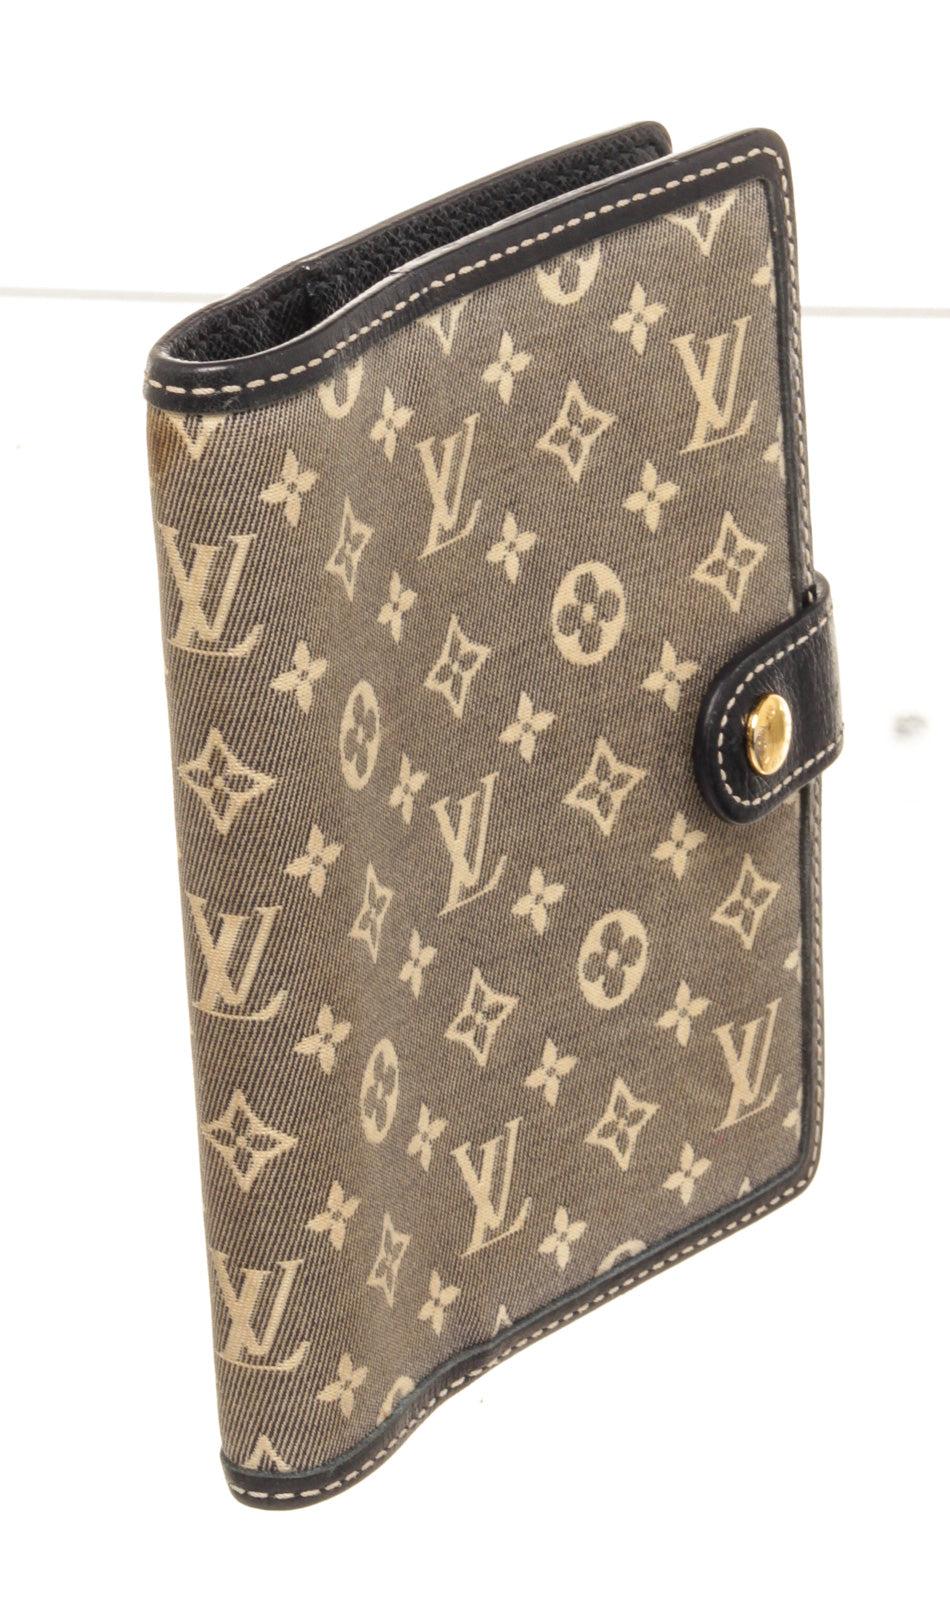 Louis Vuitton Beige Monogram Agenda PM Wallet with monogram canvas, gold-tone hardware, trim tan vachetta, leather leather lining, interior three compartments pocket and snap closure.


43551MSC